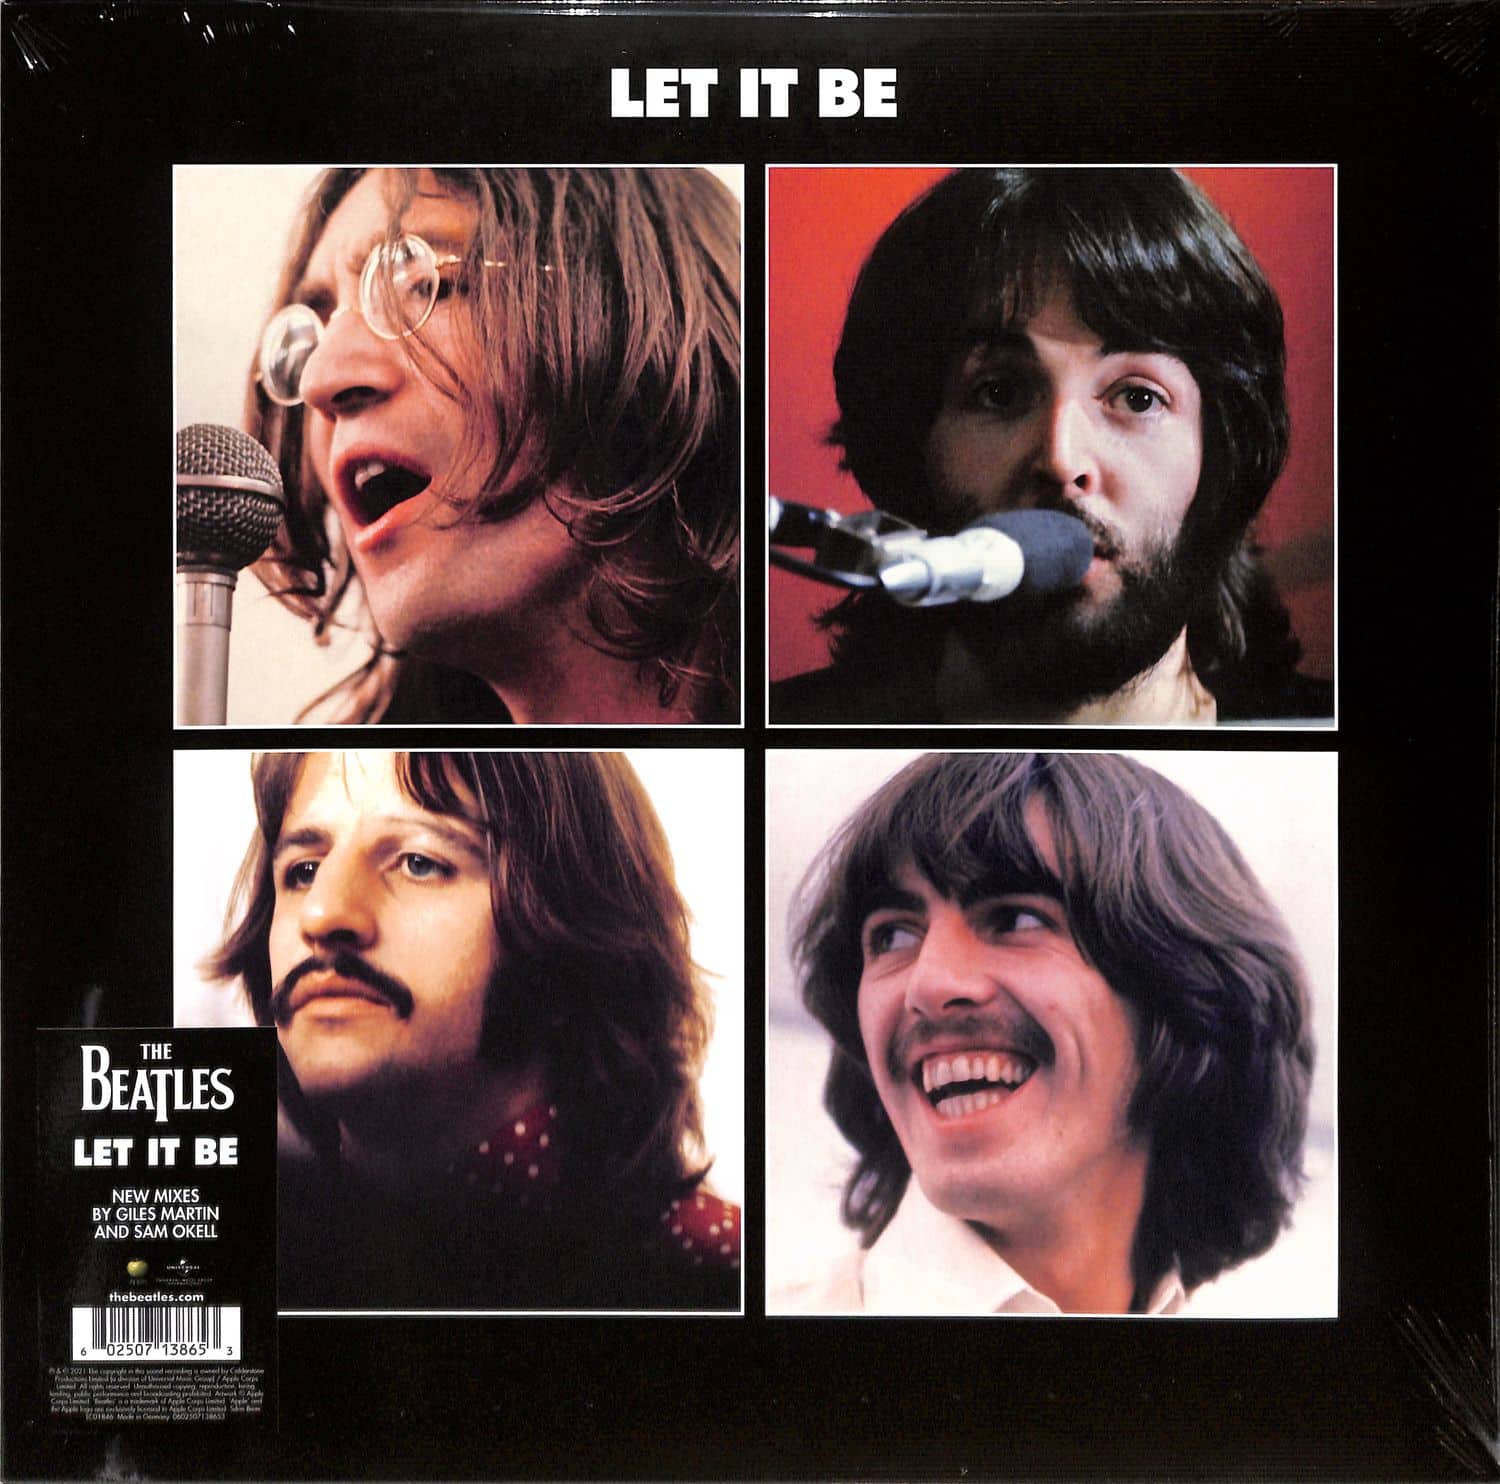 The Beatles - LET IT BE - 50TH ANNIVERSARY LP)